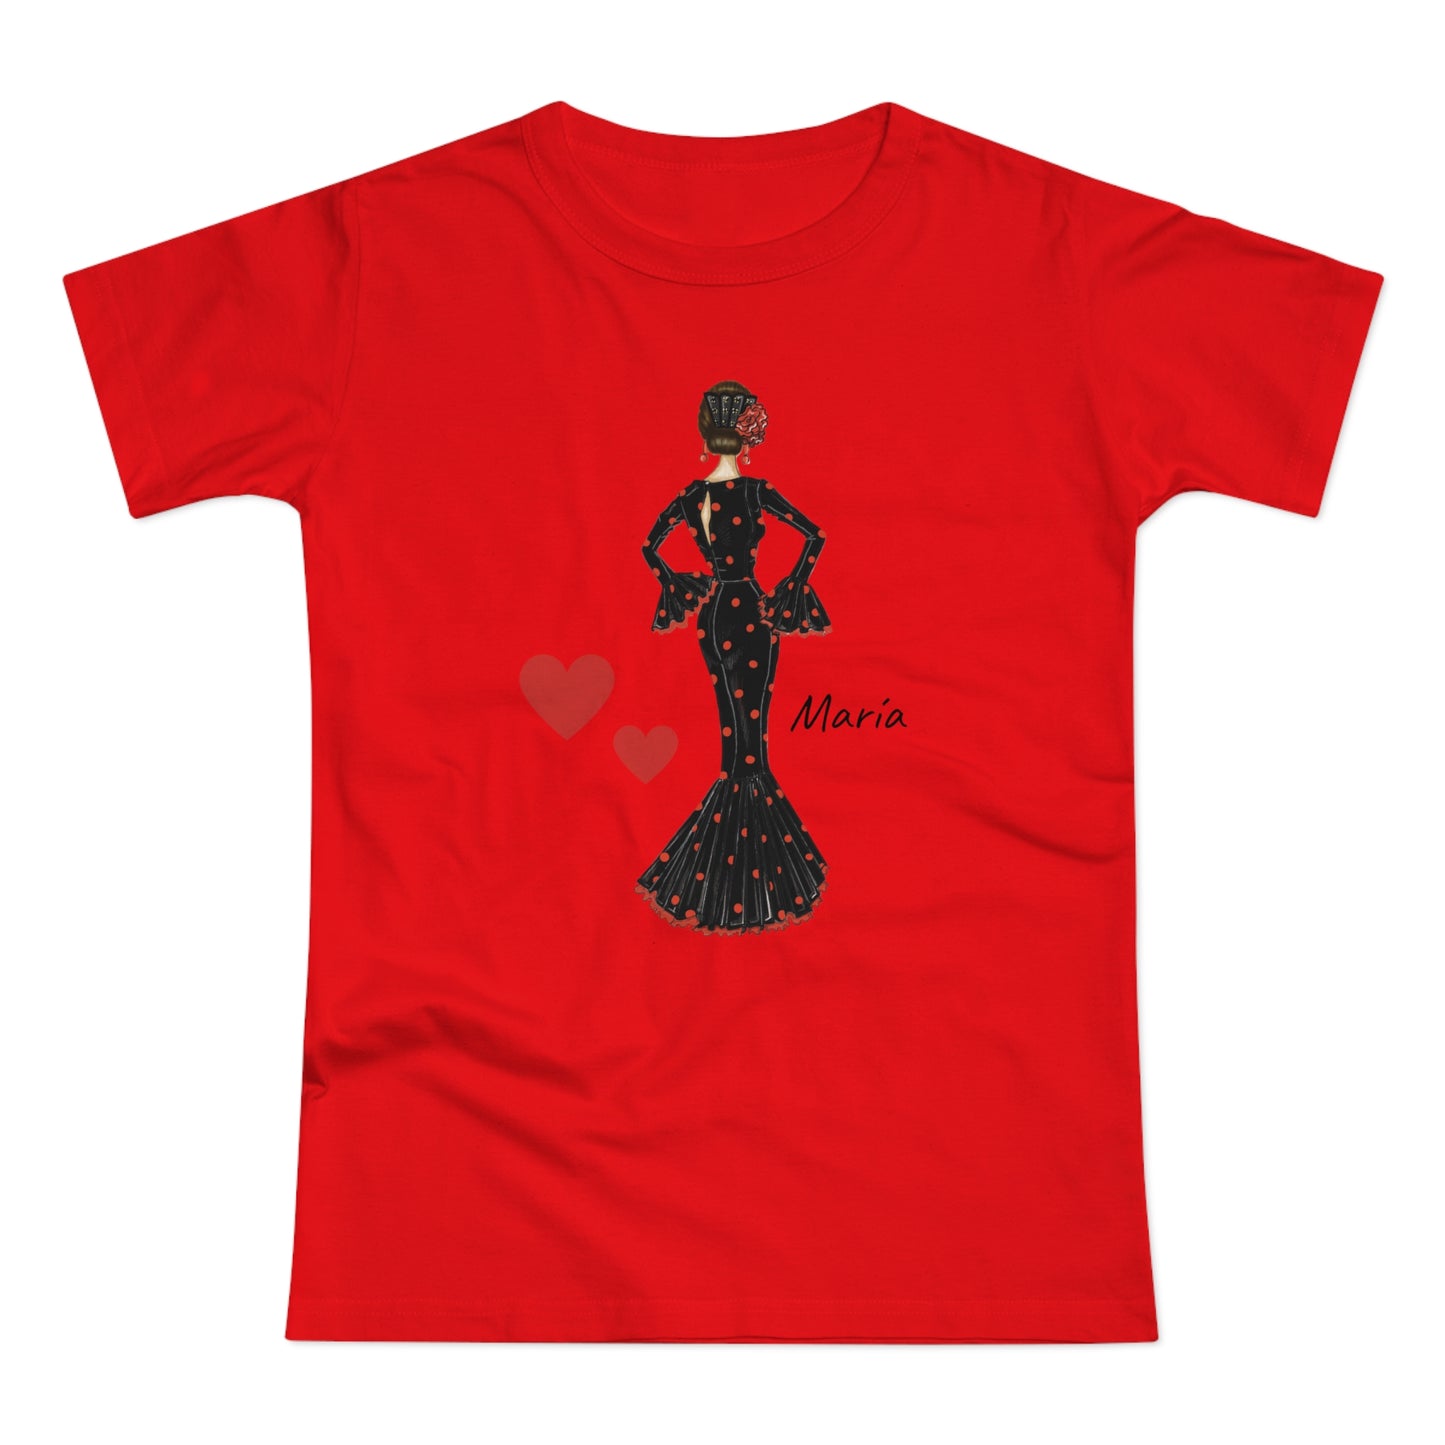 Flamenco Lovers Women's cotton tee - Flamenca Maria in a black dress with a red heart